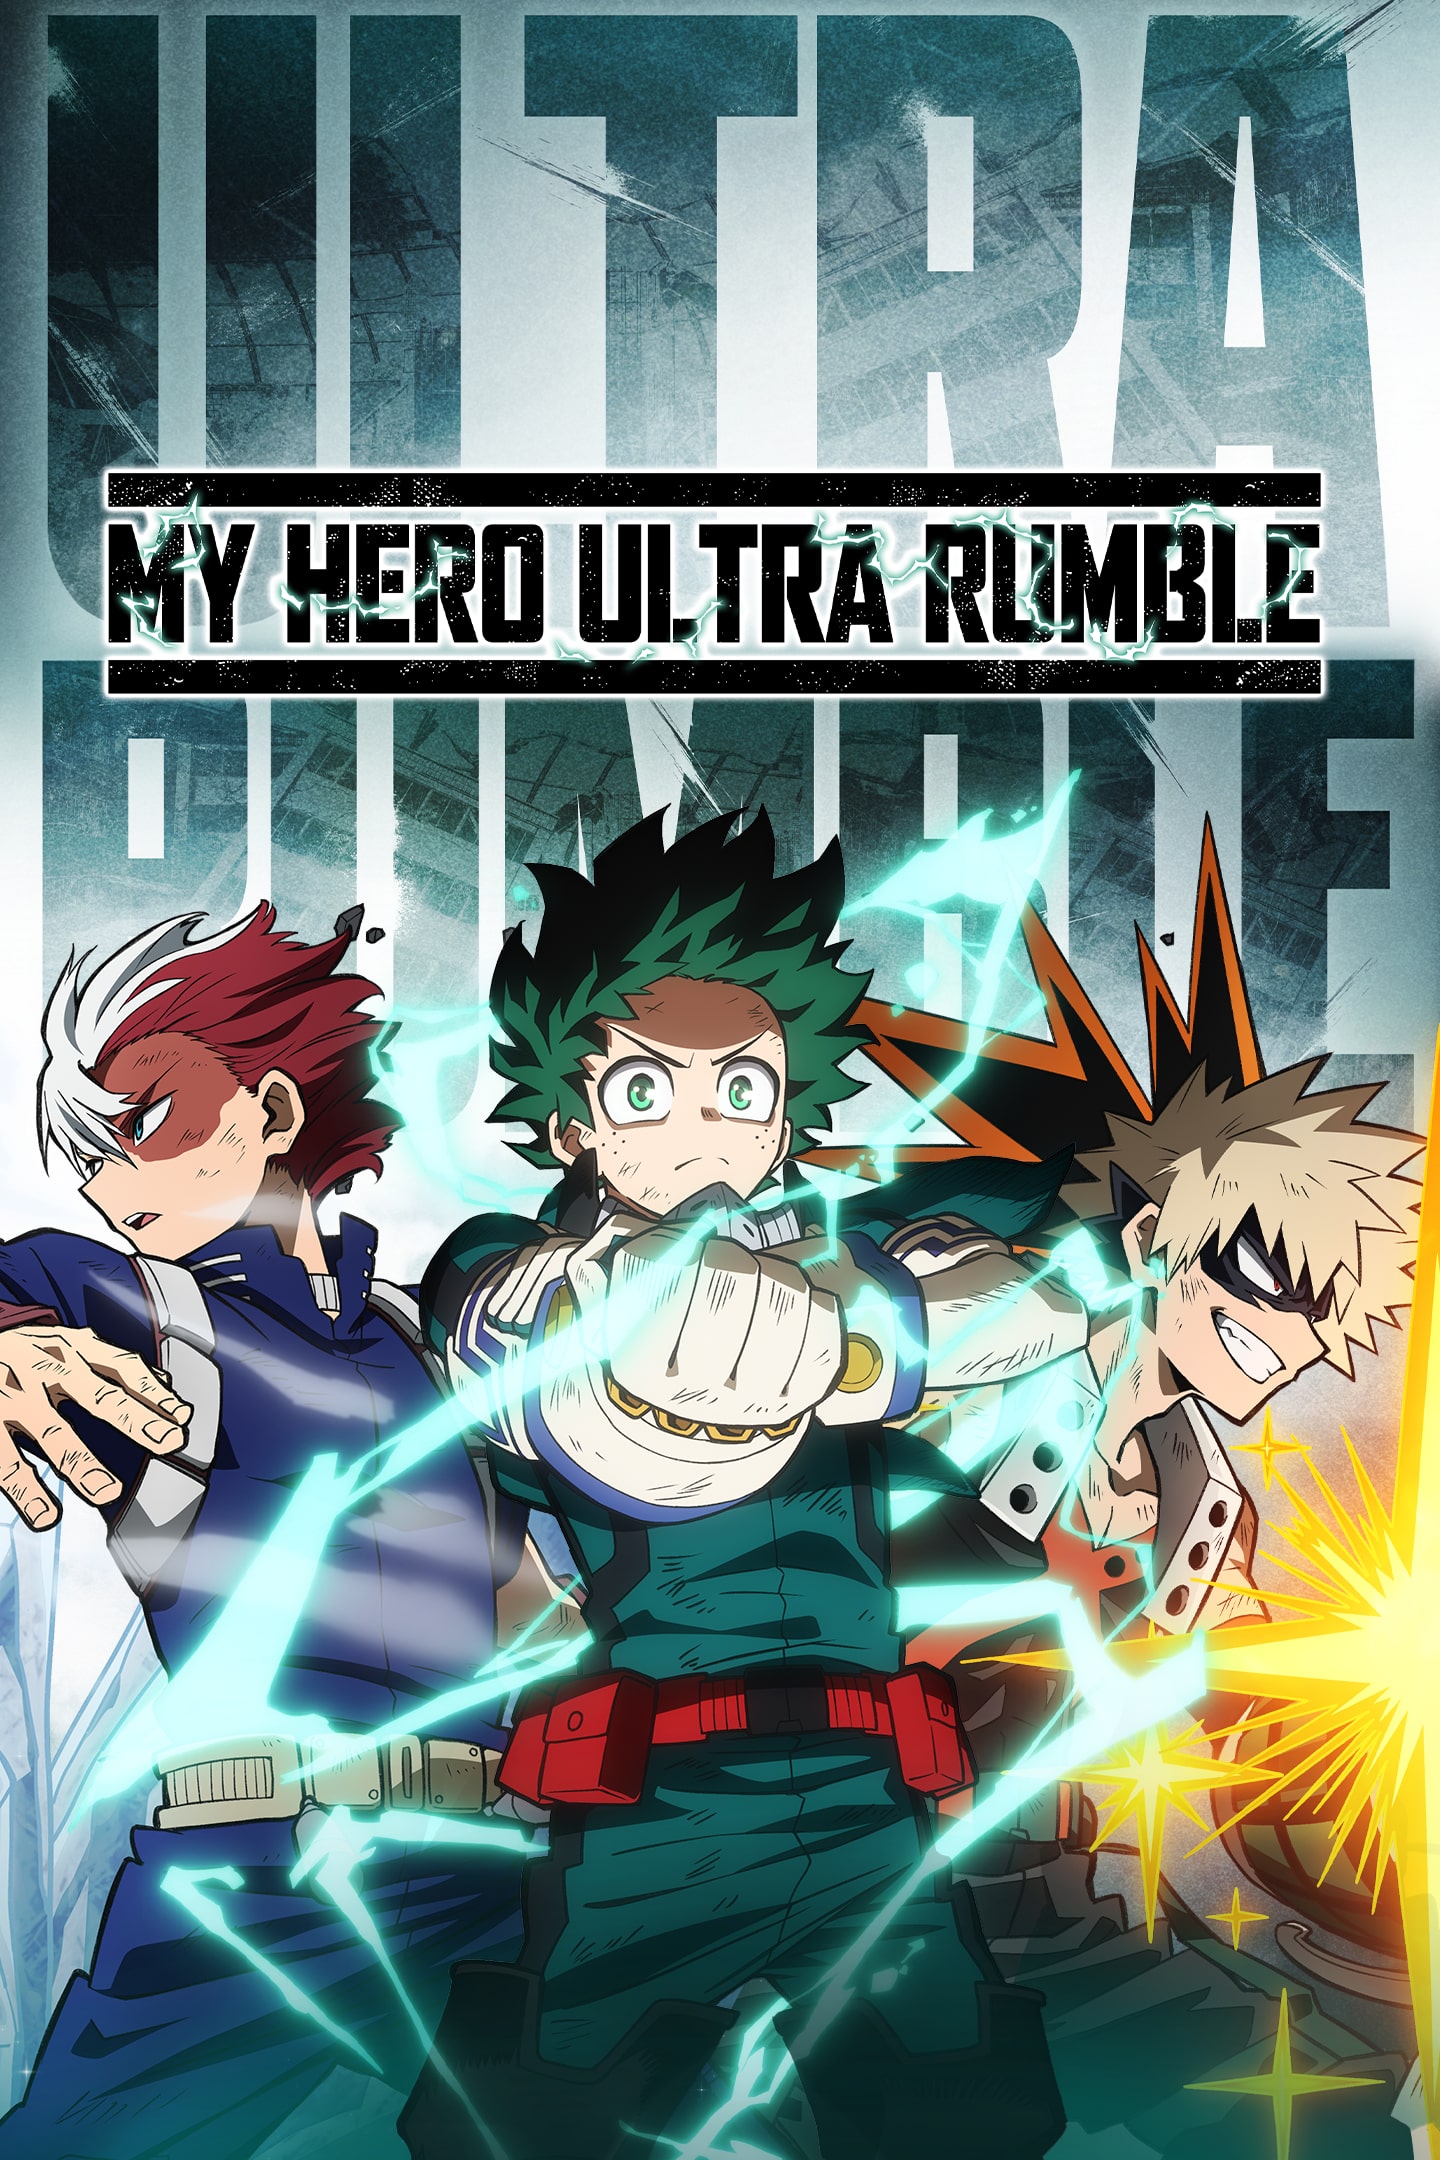 New My Hero Academia Battle Royale Console Game! Ultra Rumble! SJ Scans 